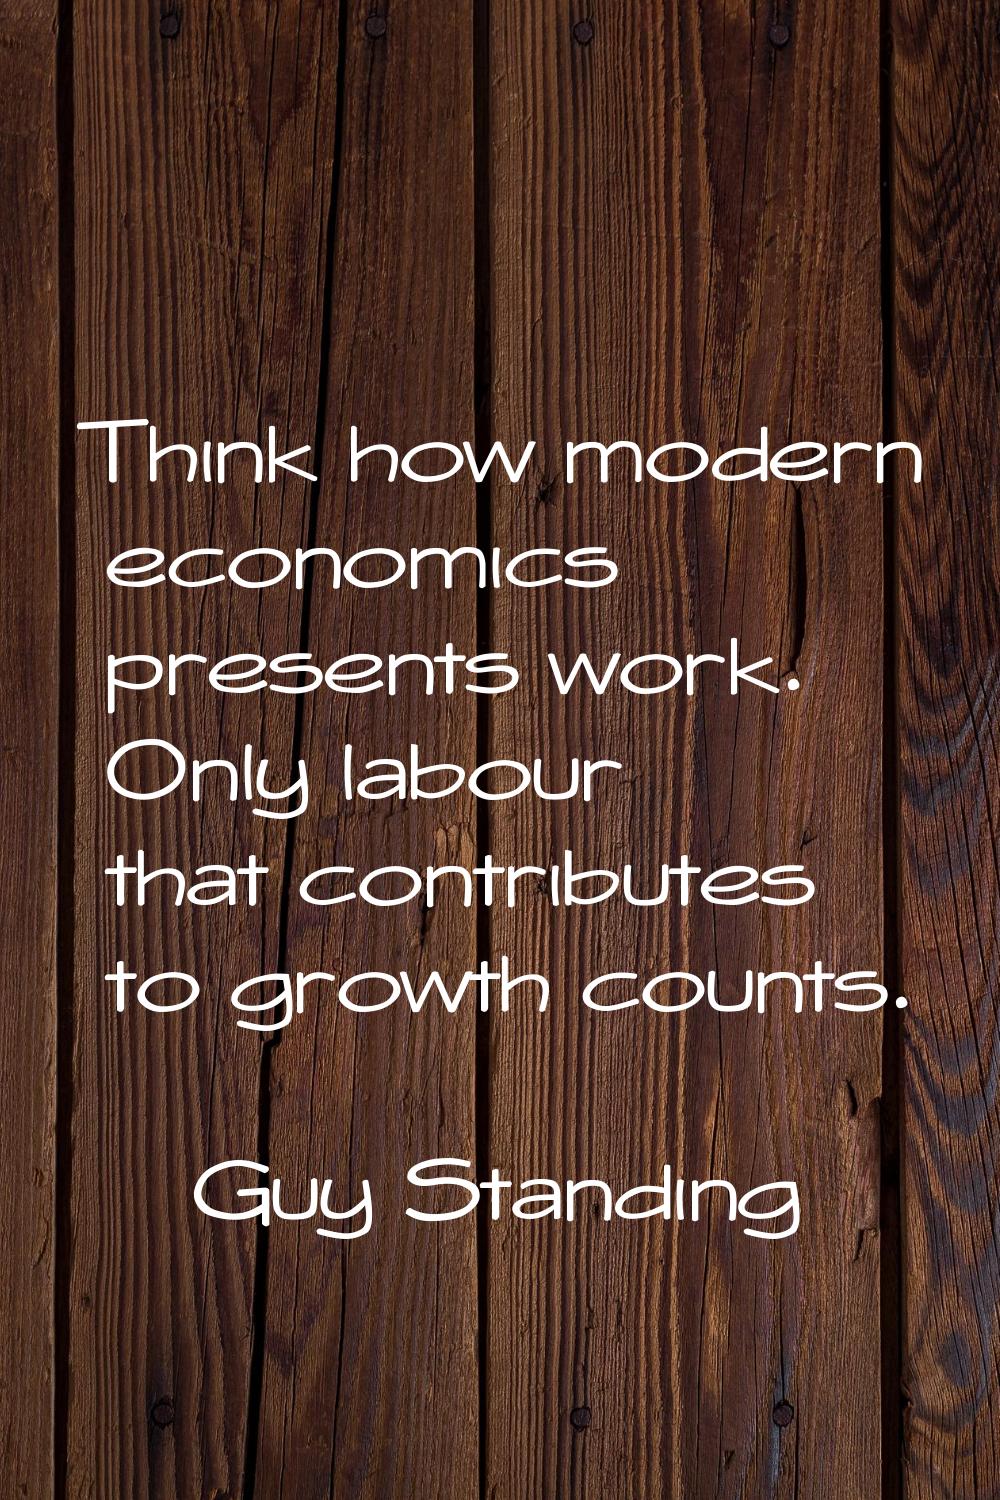 Think how modern economics presents work. Only labour that contributes to growth counts.